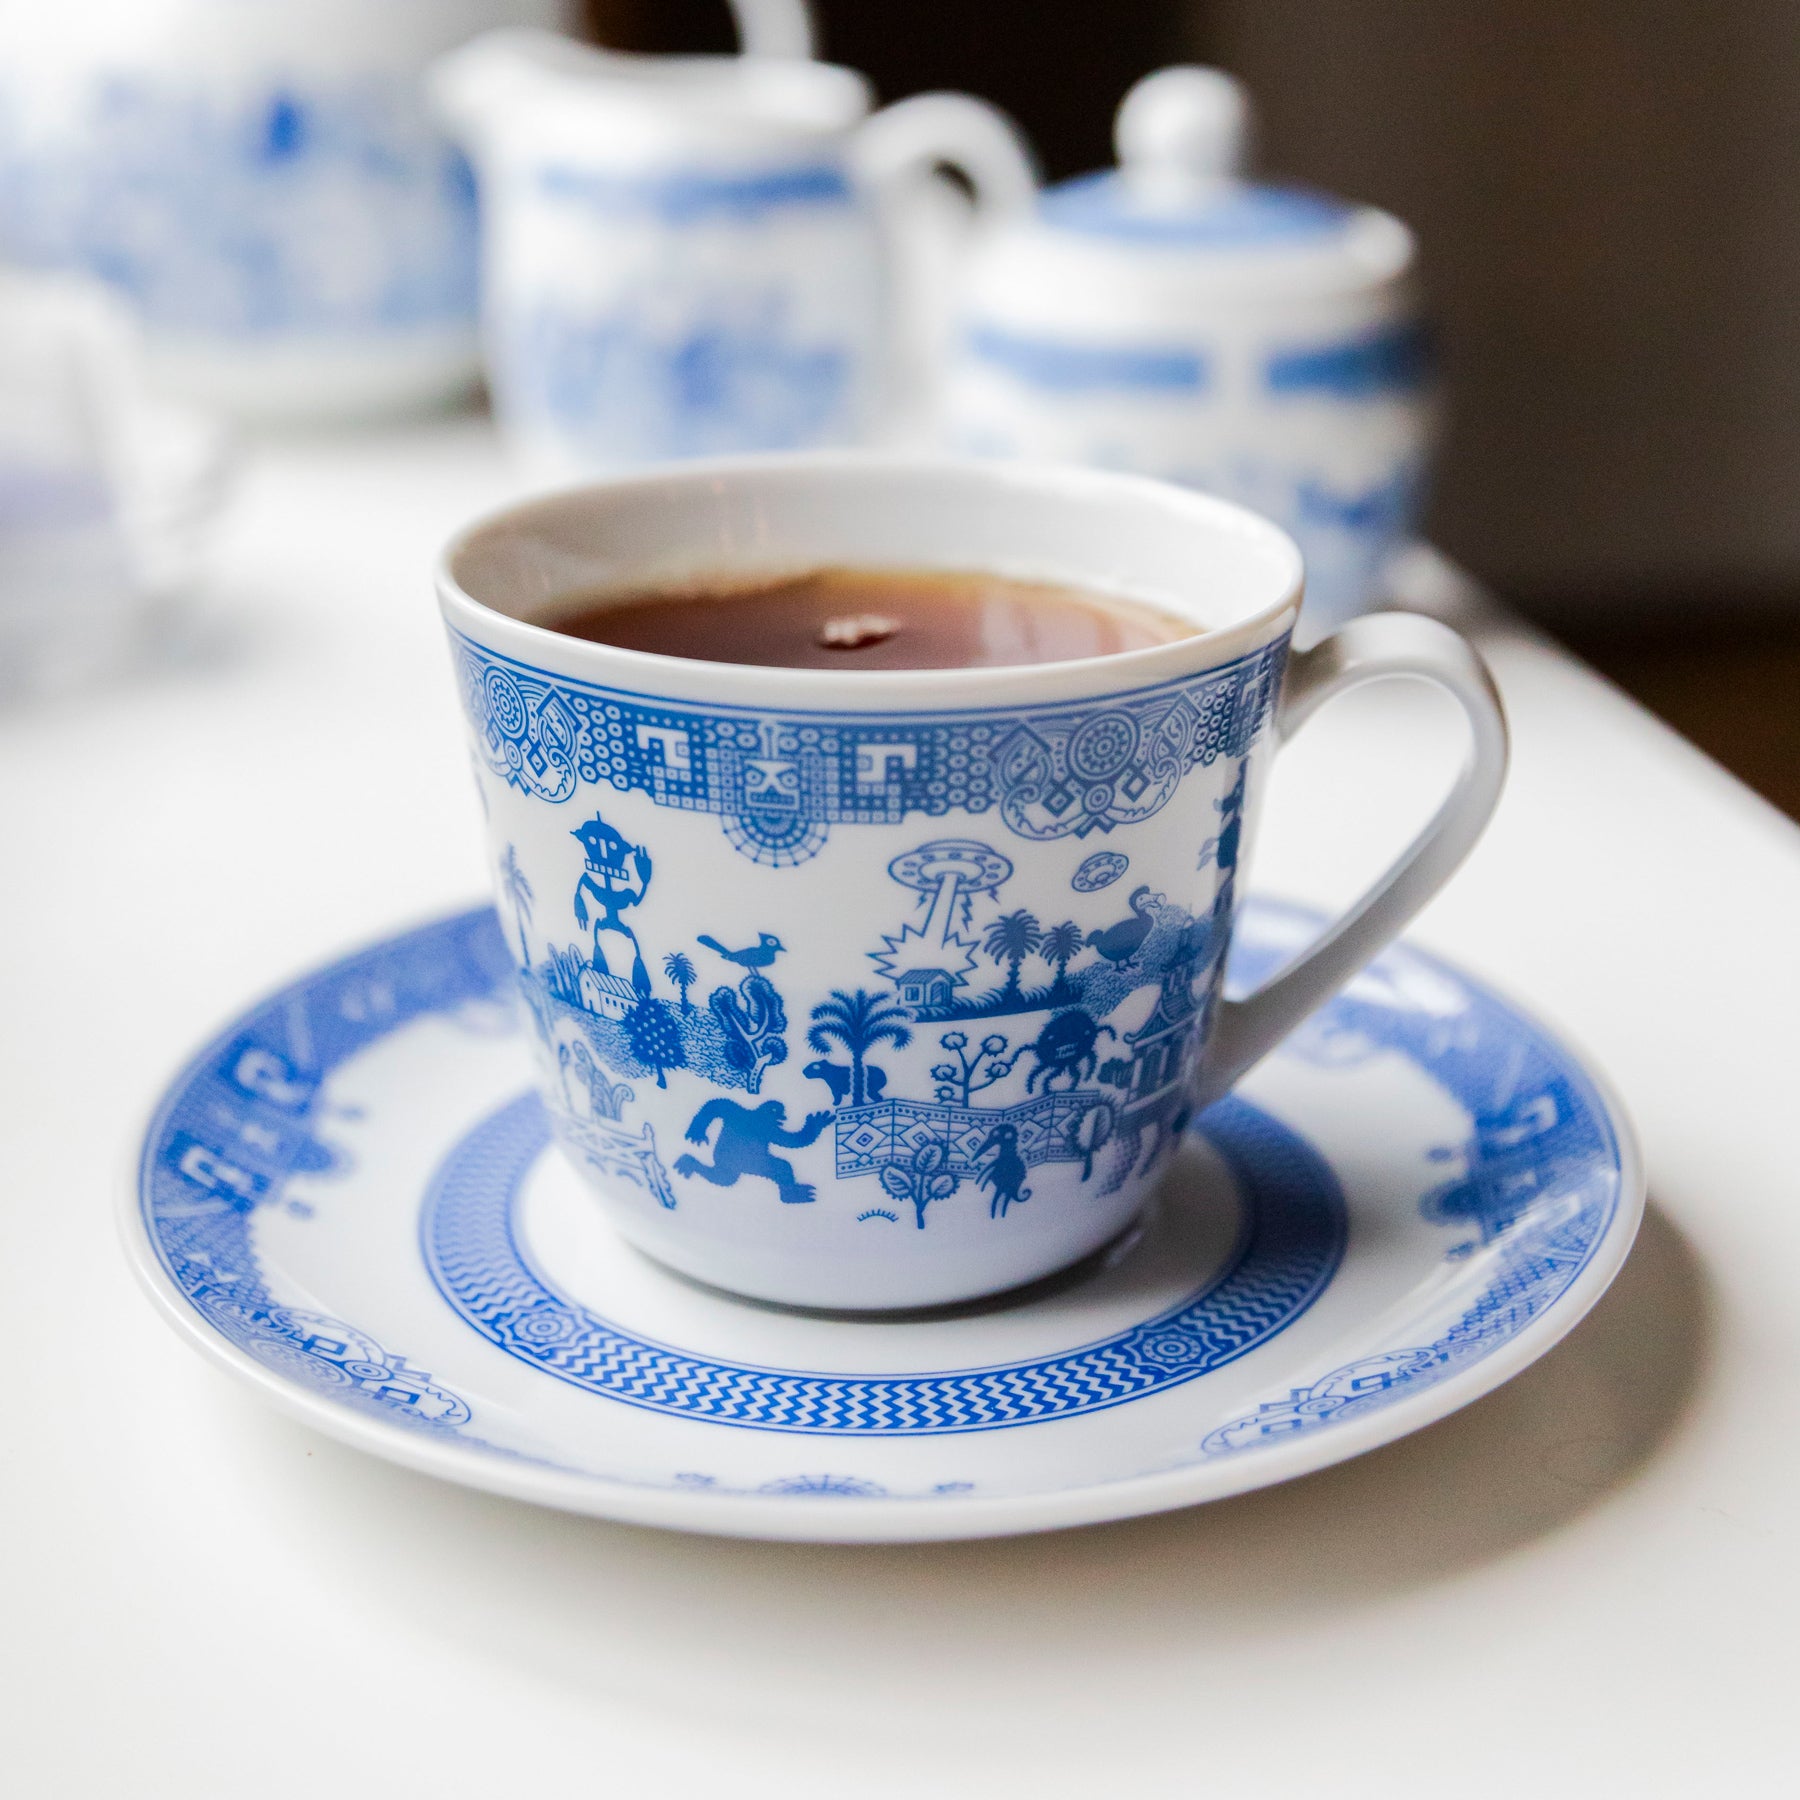 Things Could Be Worse Teacups and Saucers (2-pack) - Calamityware